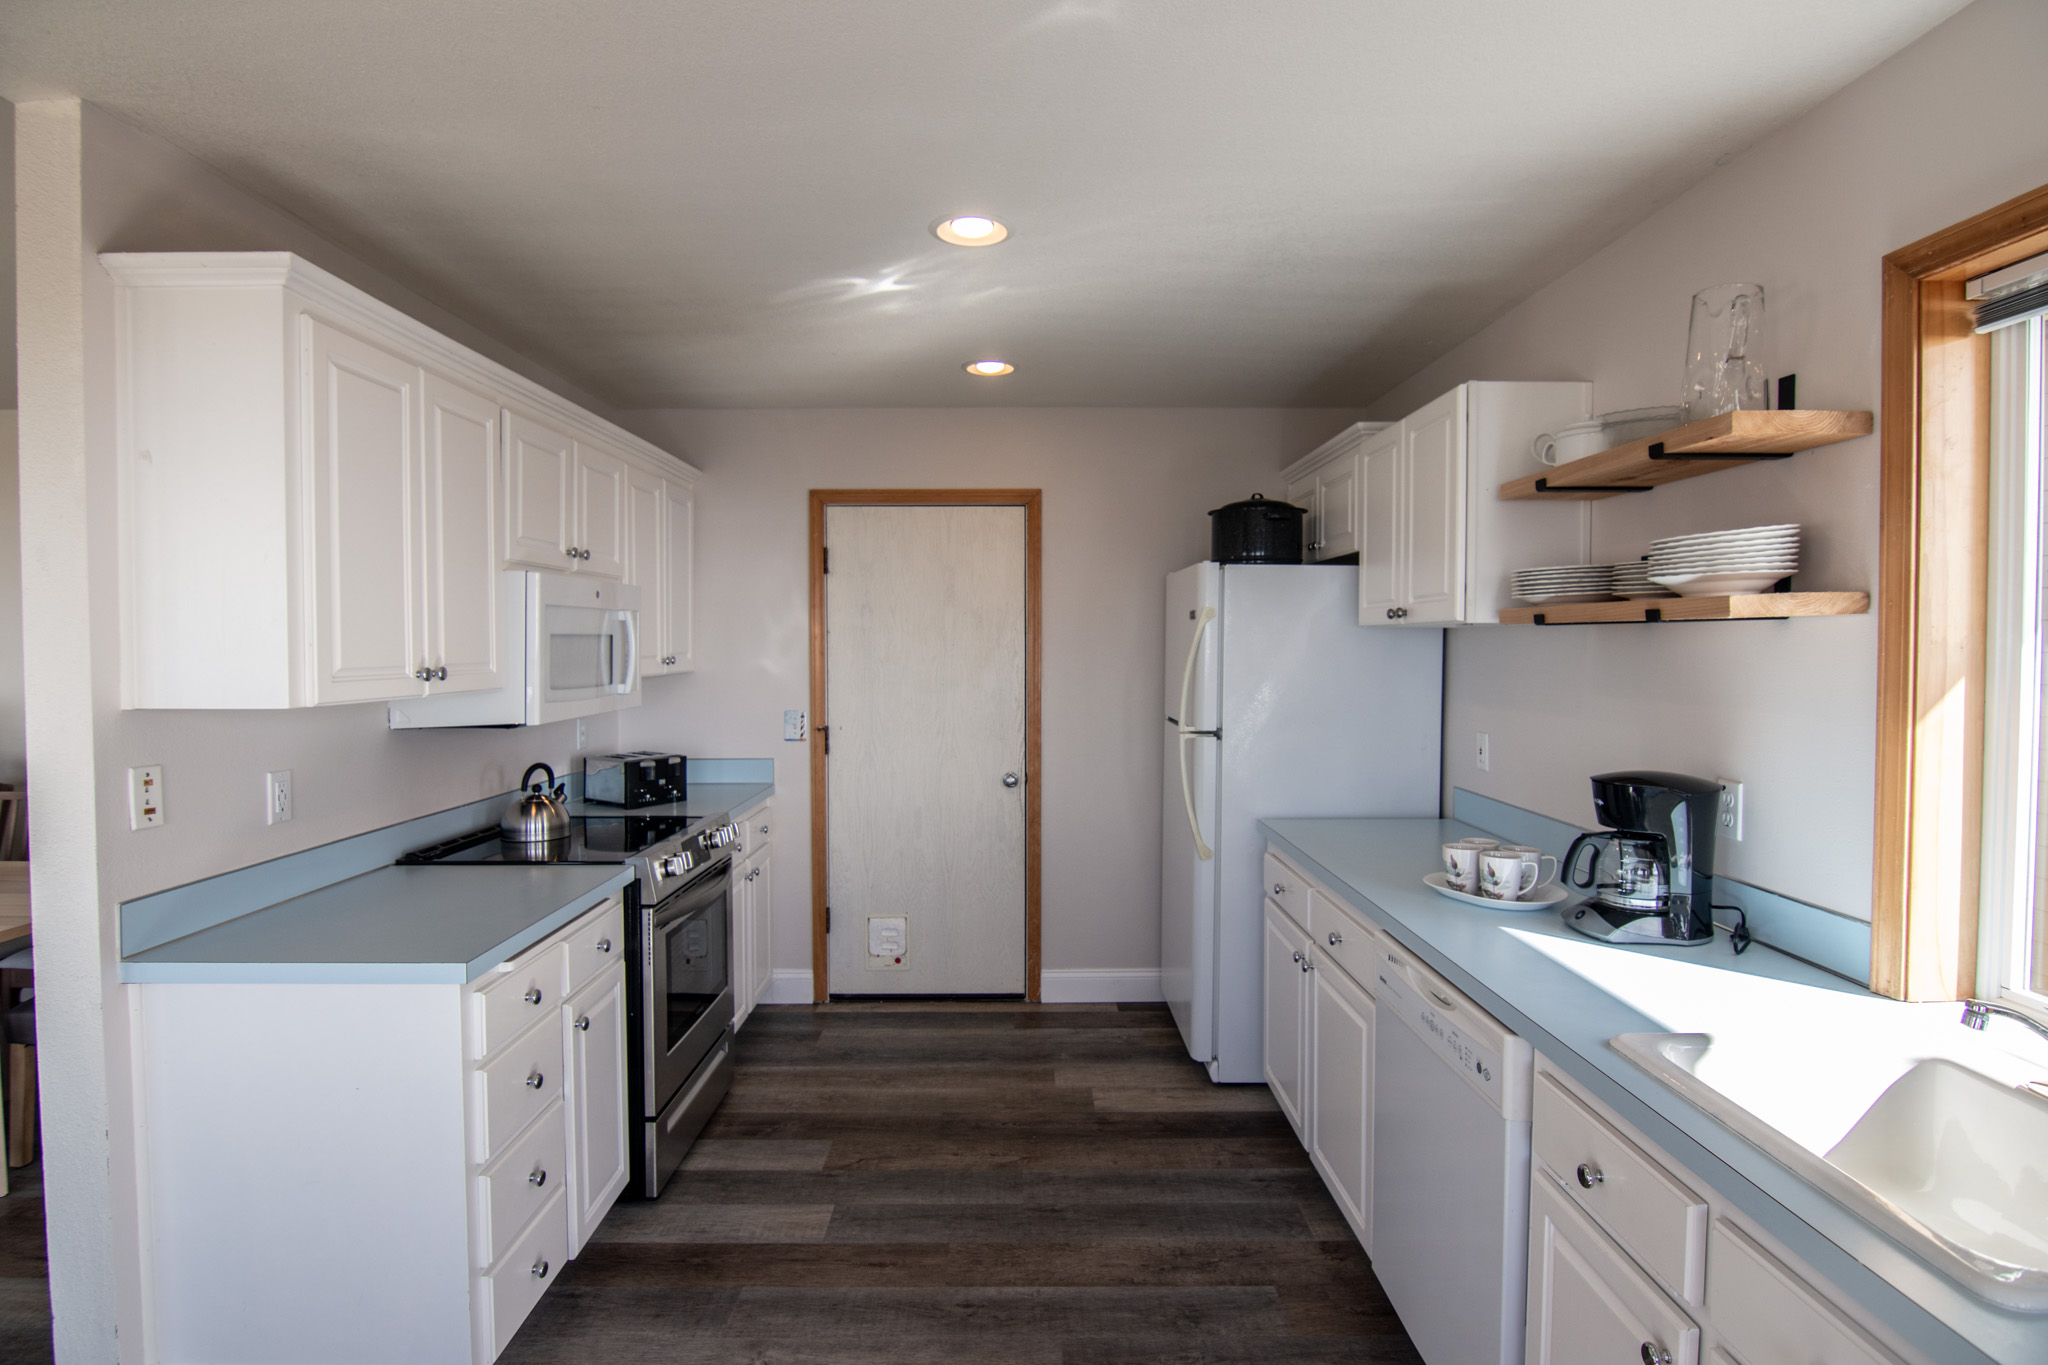 The family chef will love cooking dinner in the well-appointed kitchen.